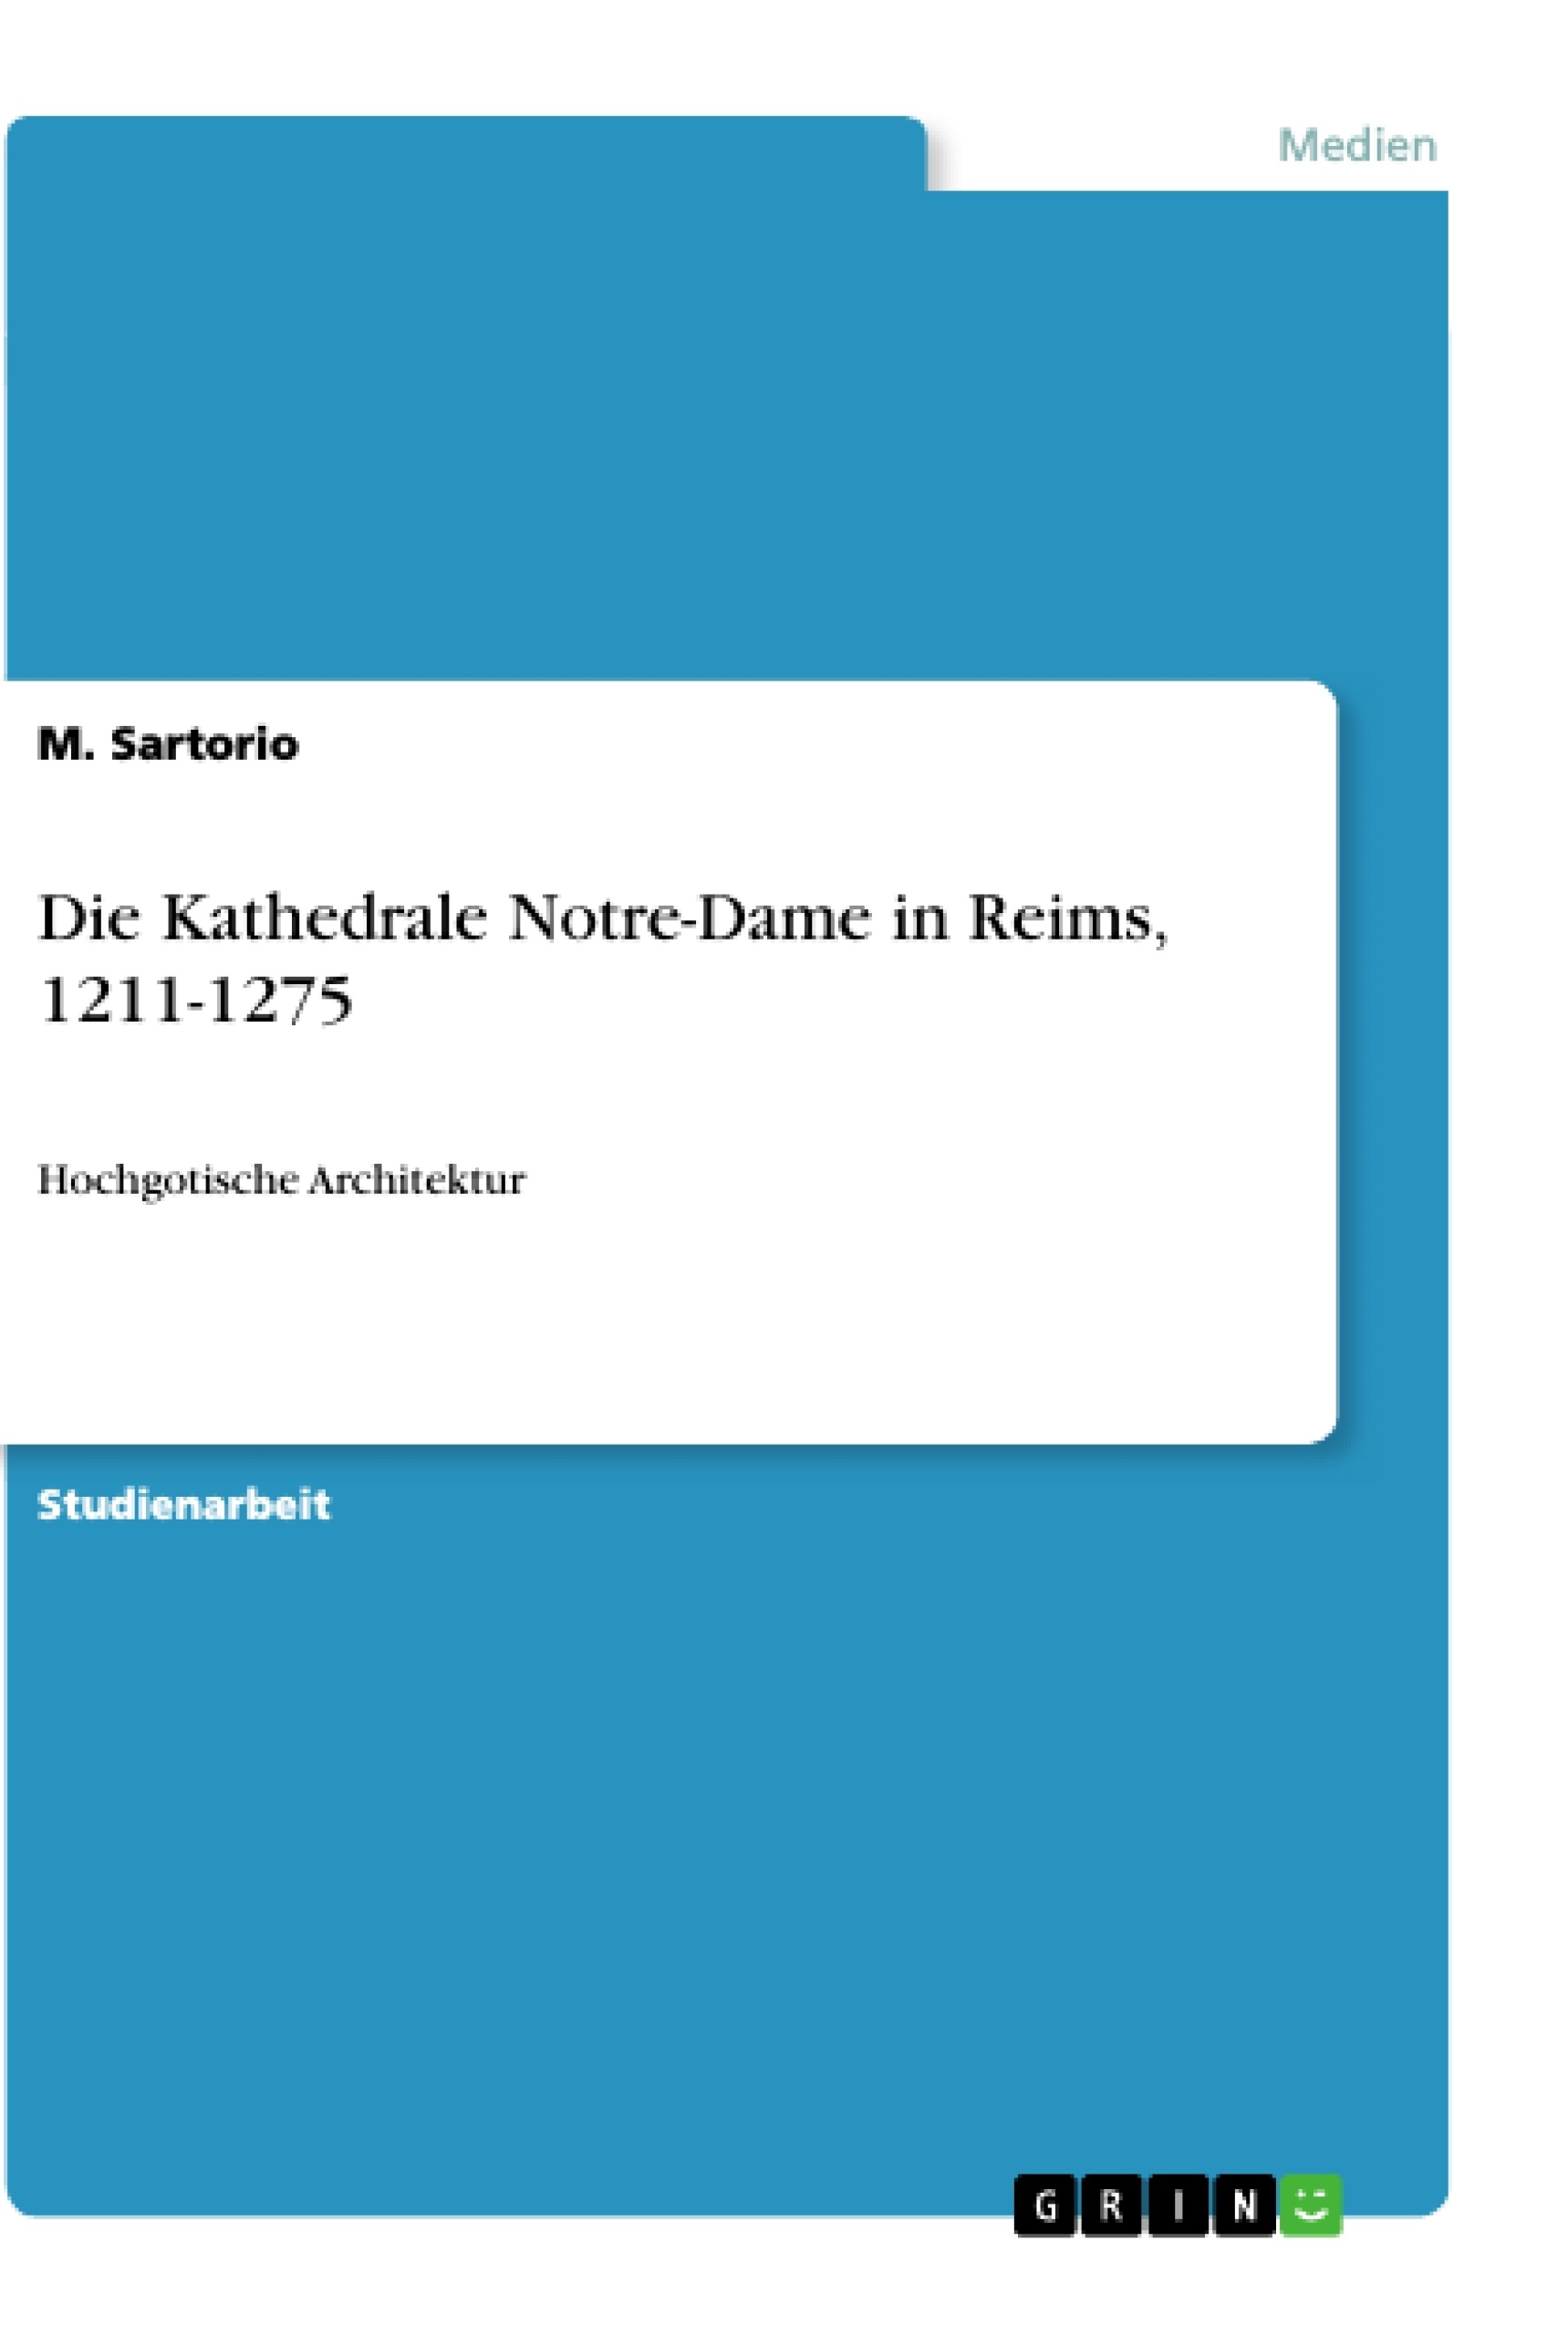 Titre: Die Kathedrale Notre-Dame in Reims, 1211-1275